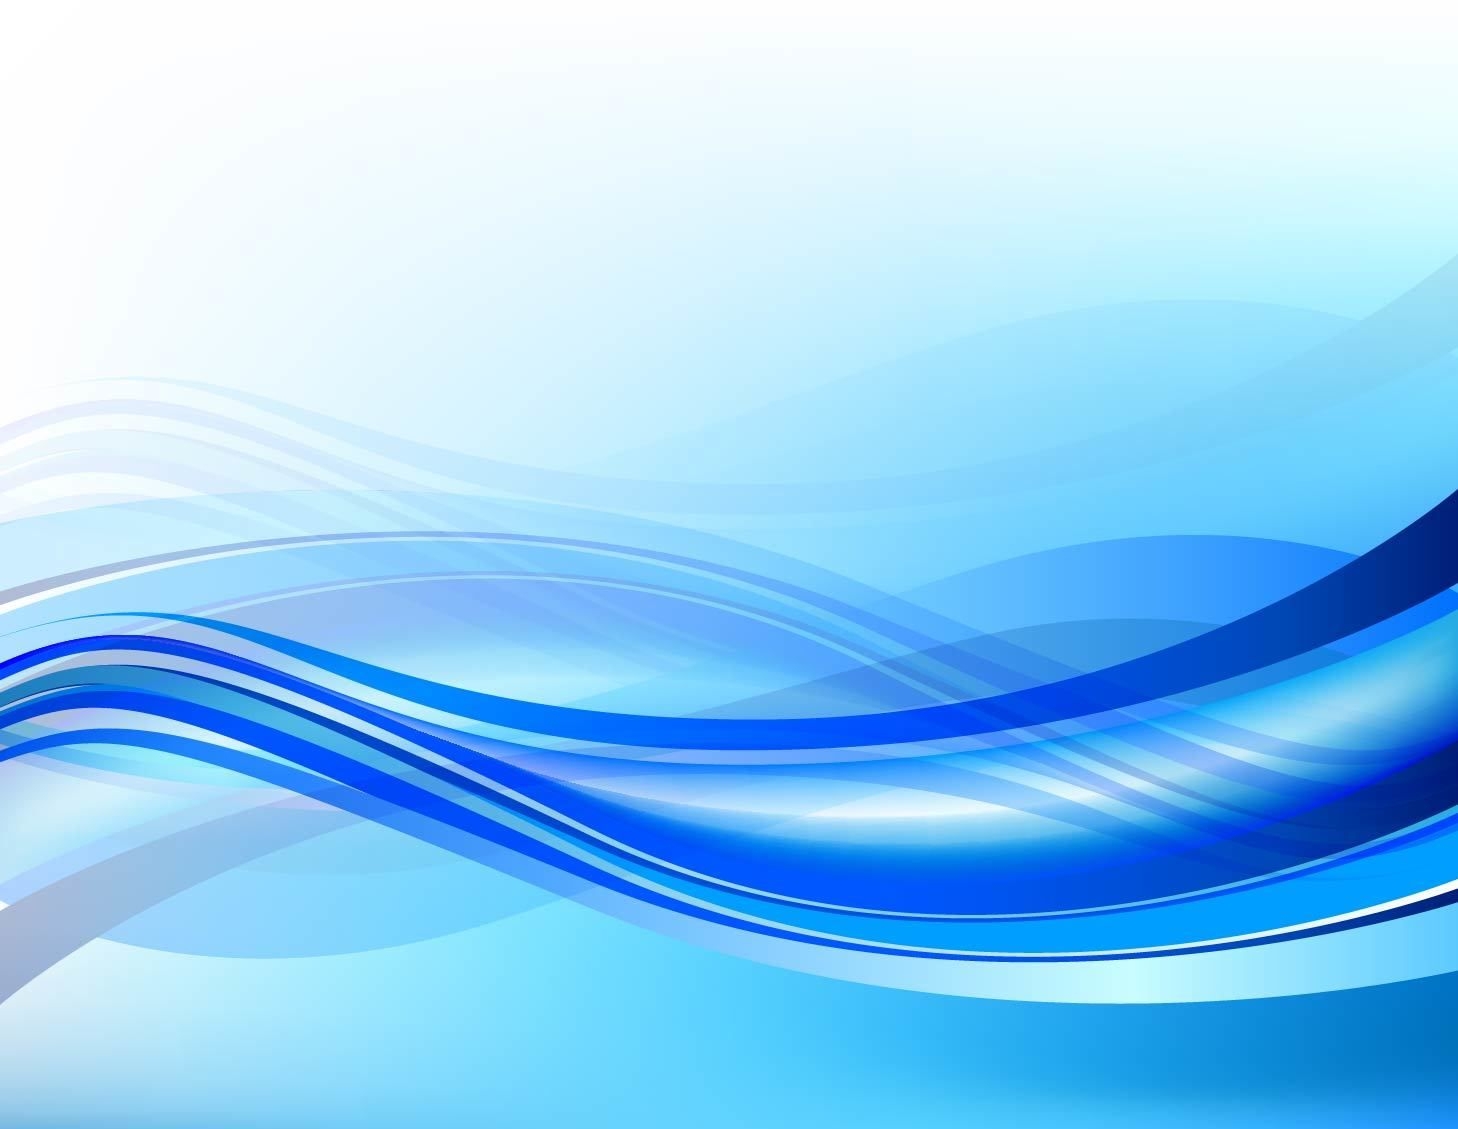 Abstract Blue Background with Waves - Vector download